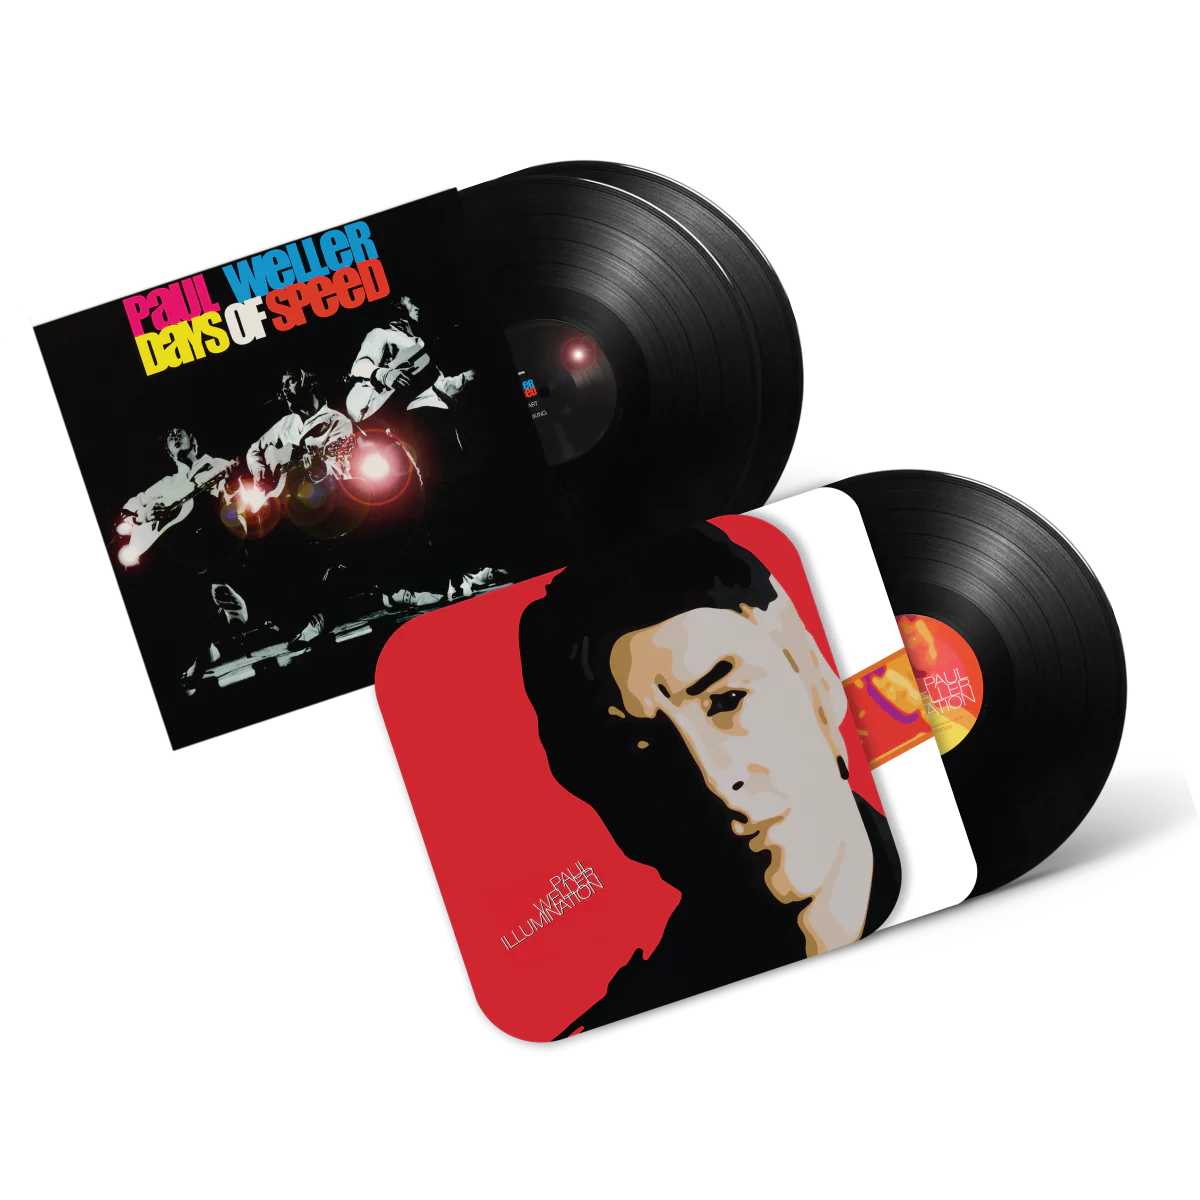 PAUL WELLER TO REISSUE DAYS OF SPEED & ILLUMINATION FOR THE